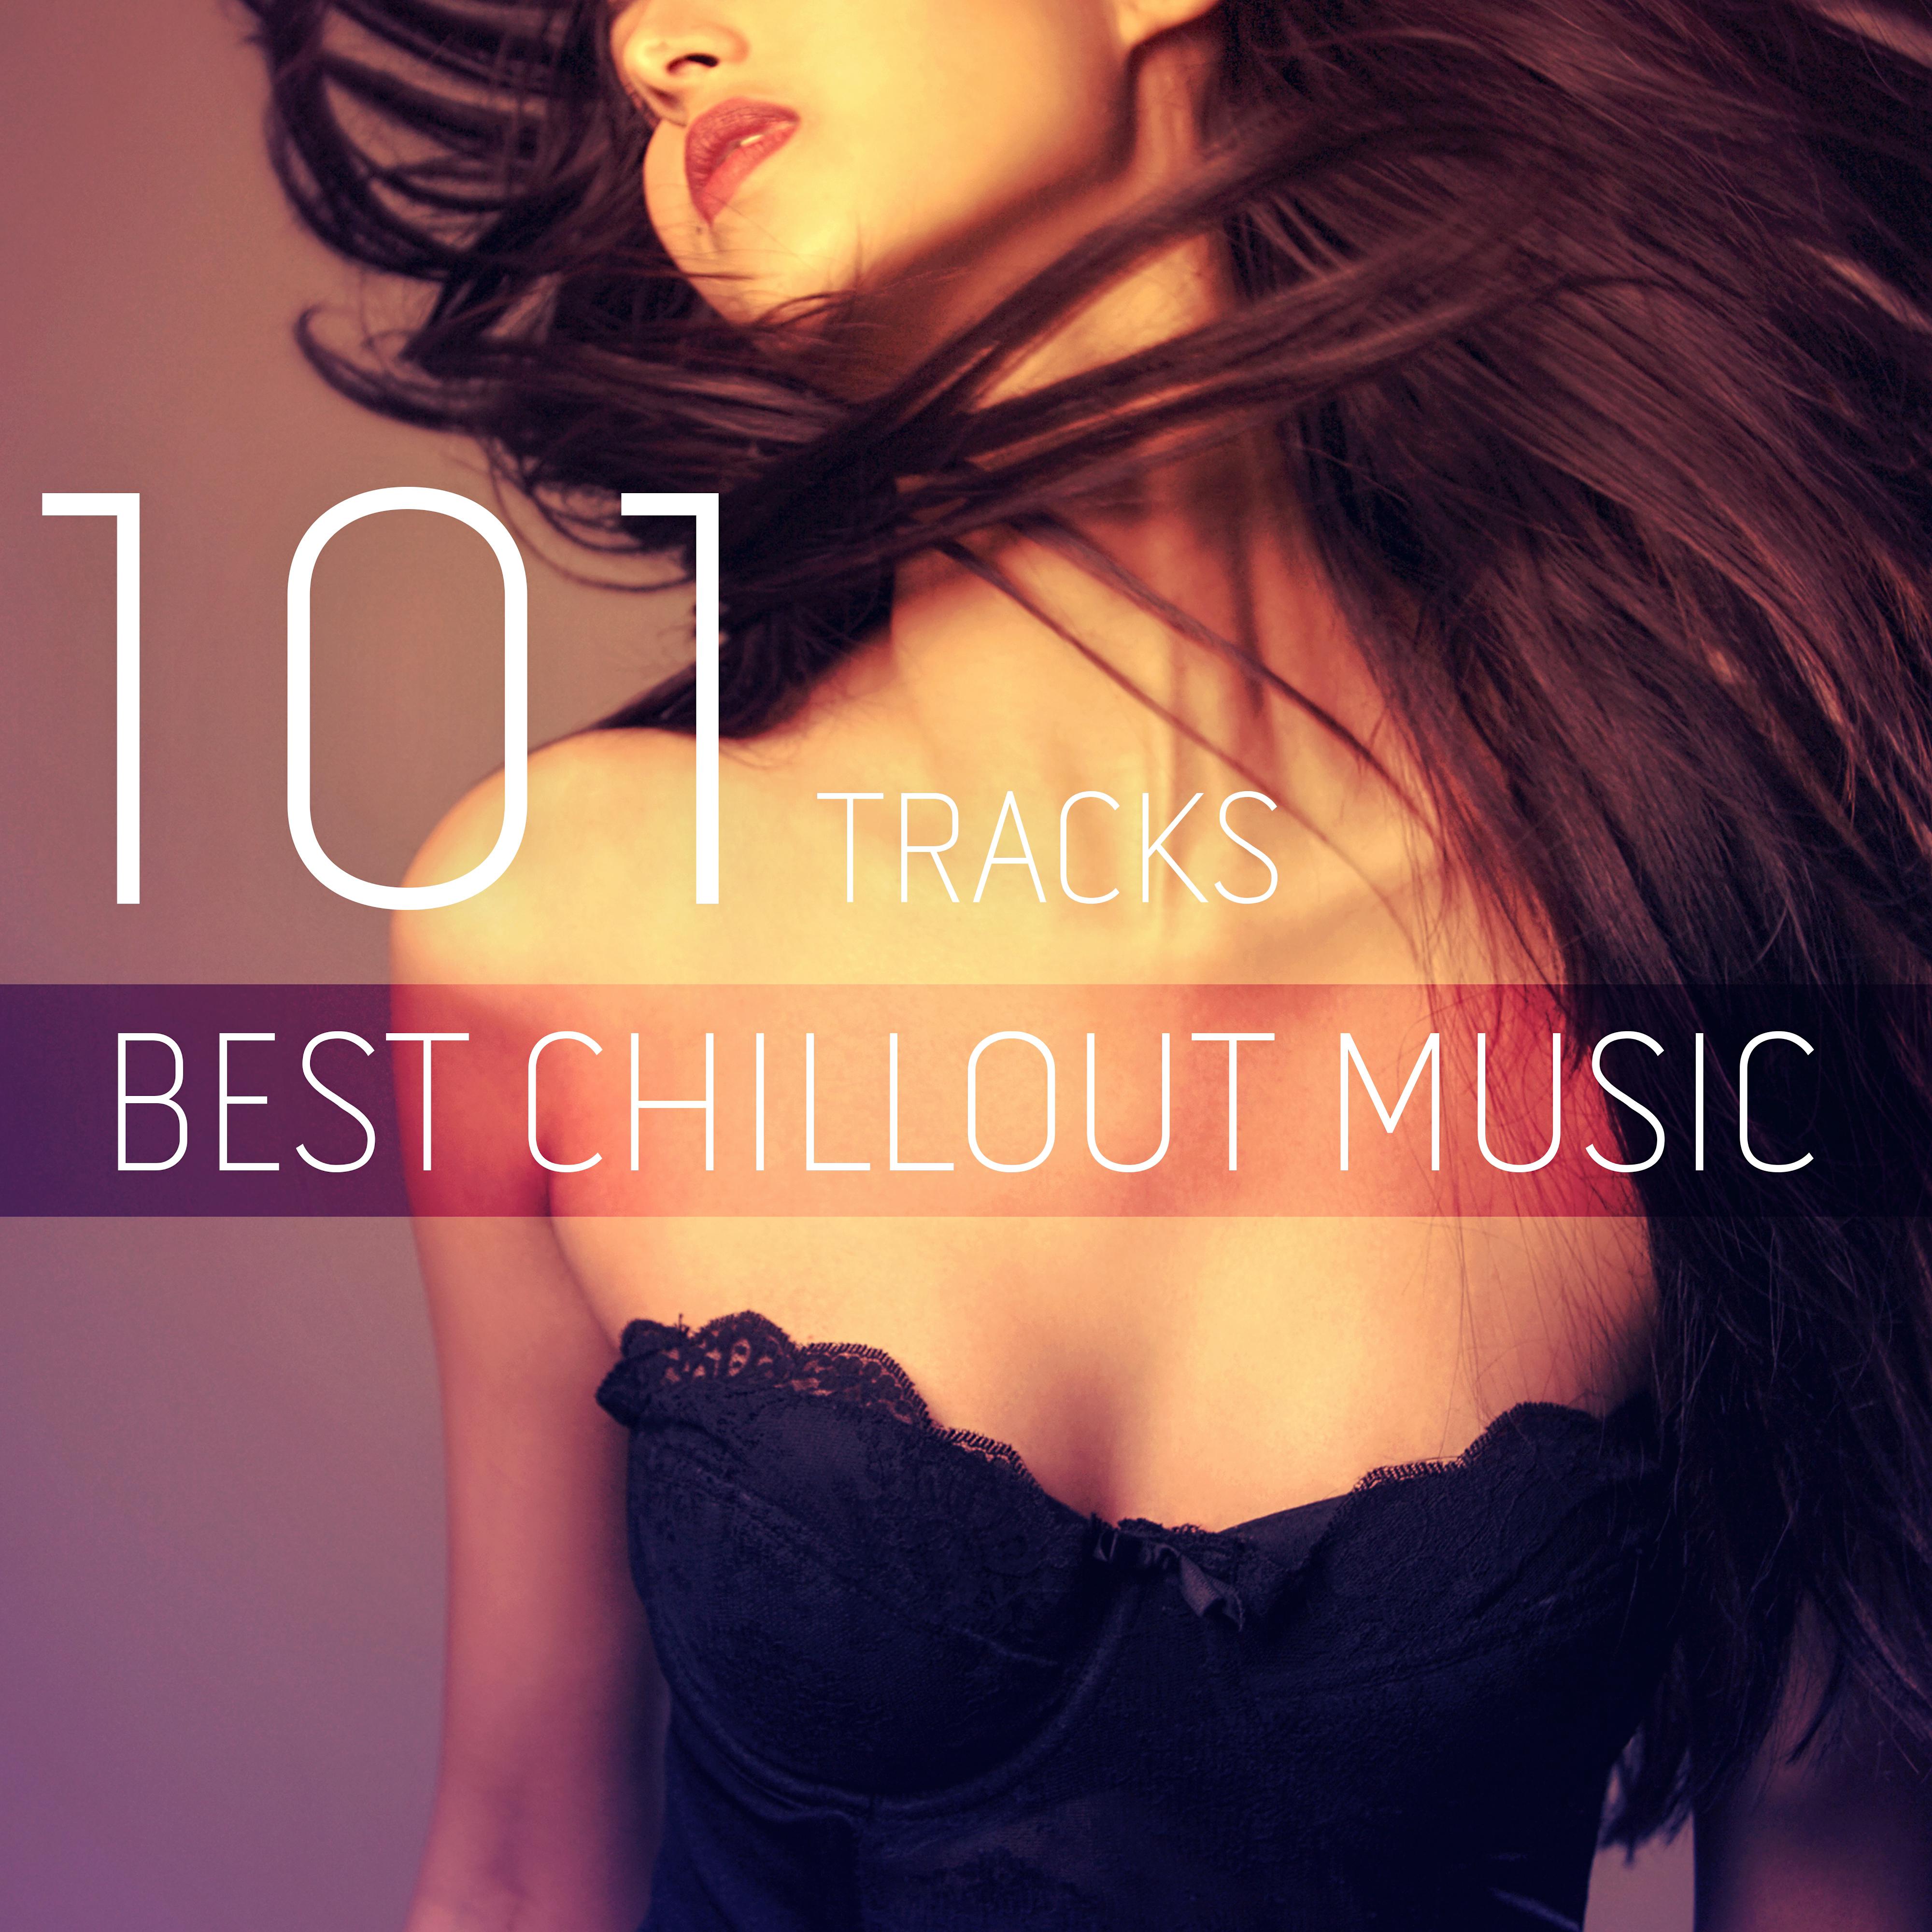 Best Chillout Music 101 Tracks – Buddha Lounge Music Ibiza, Bar del Mar Party Time, Electronic Music Collection, Beach House Party, Chill Out Background Music